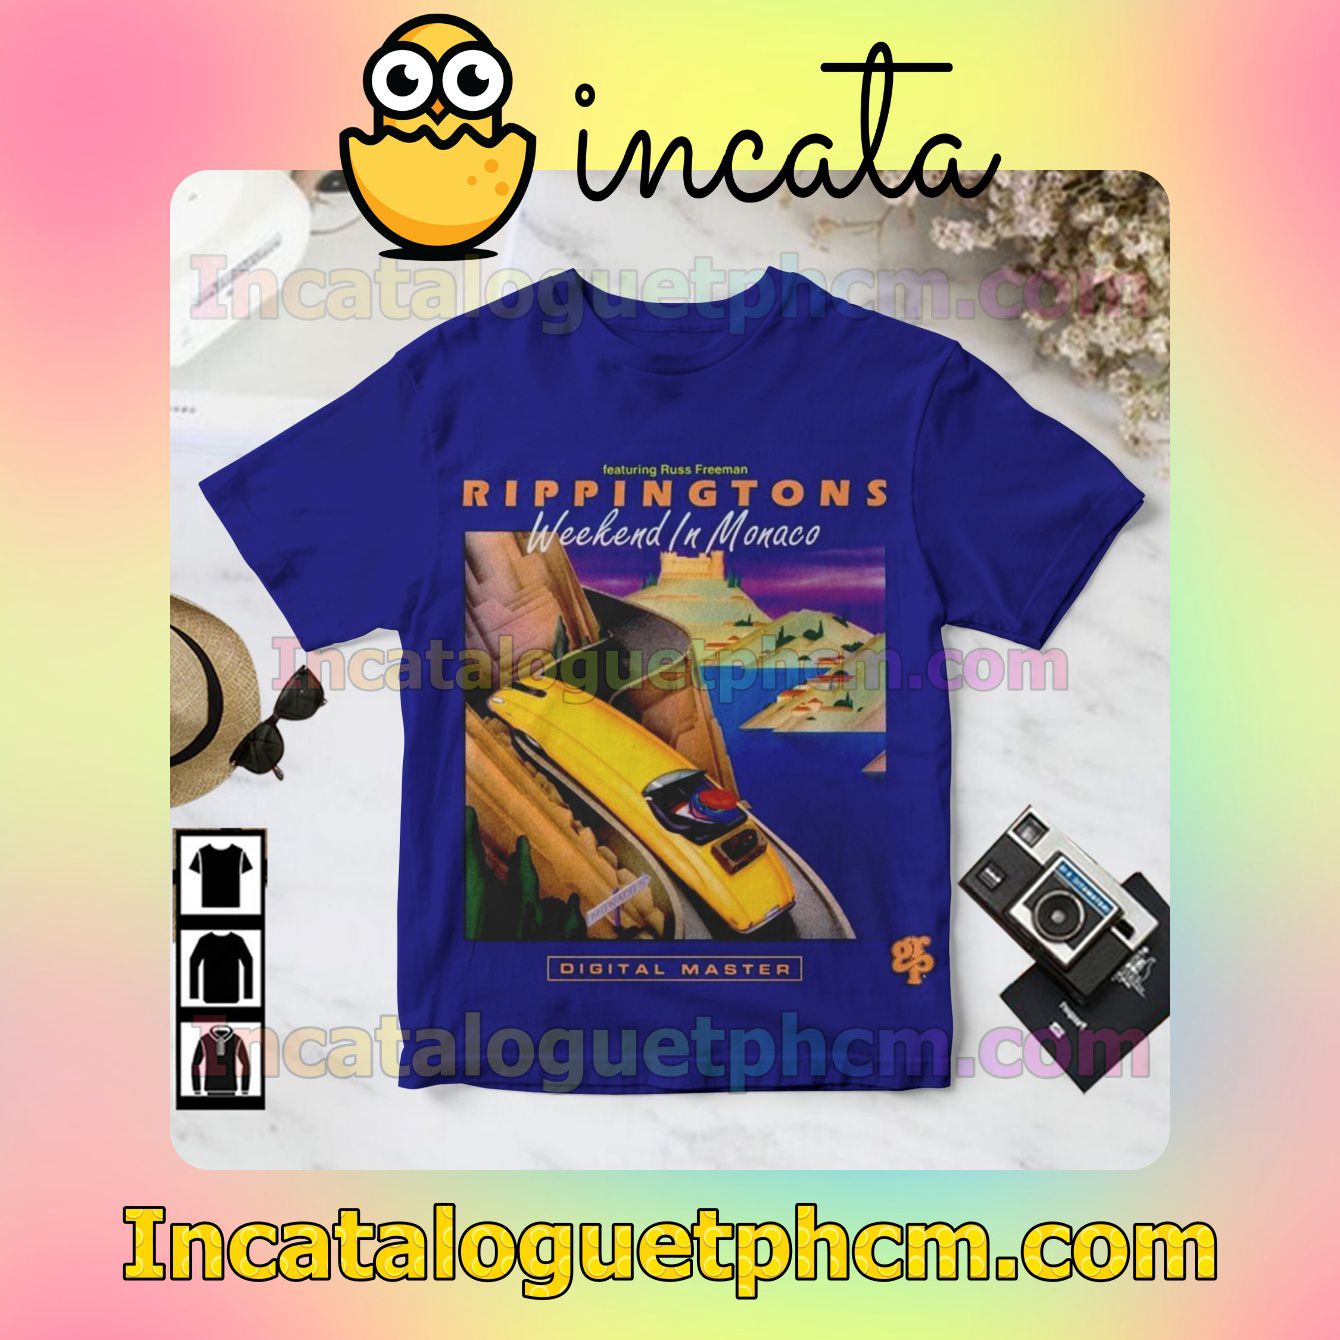 The Rippingtons Weekend In Monaco Album Cover For Fan Shirt